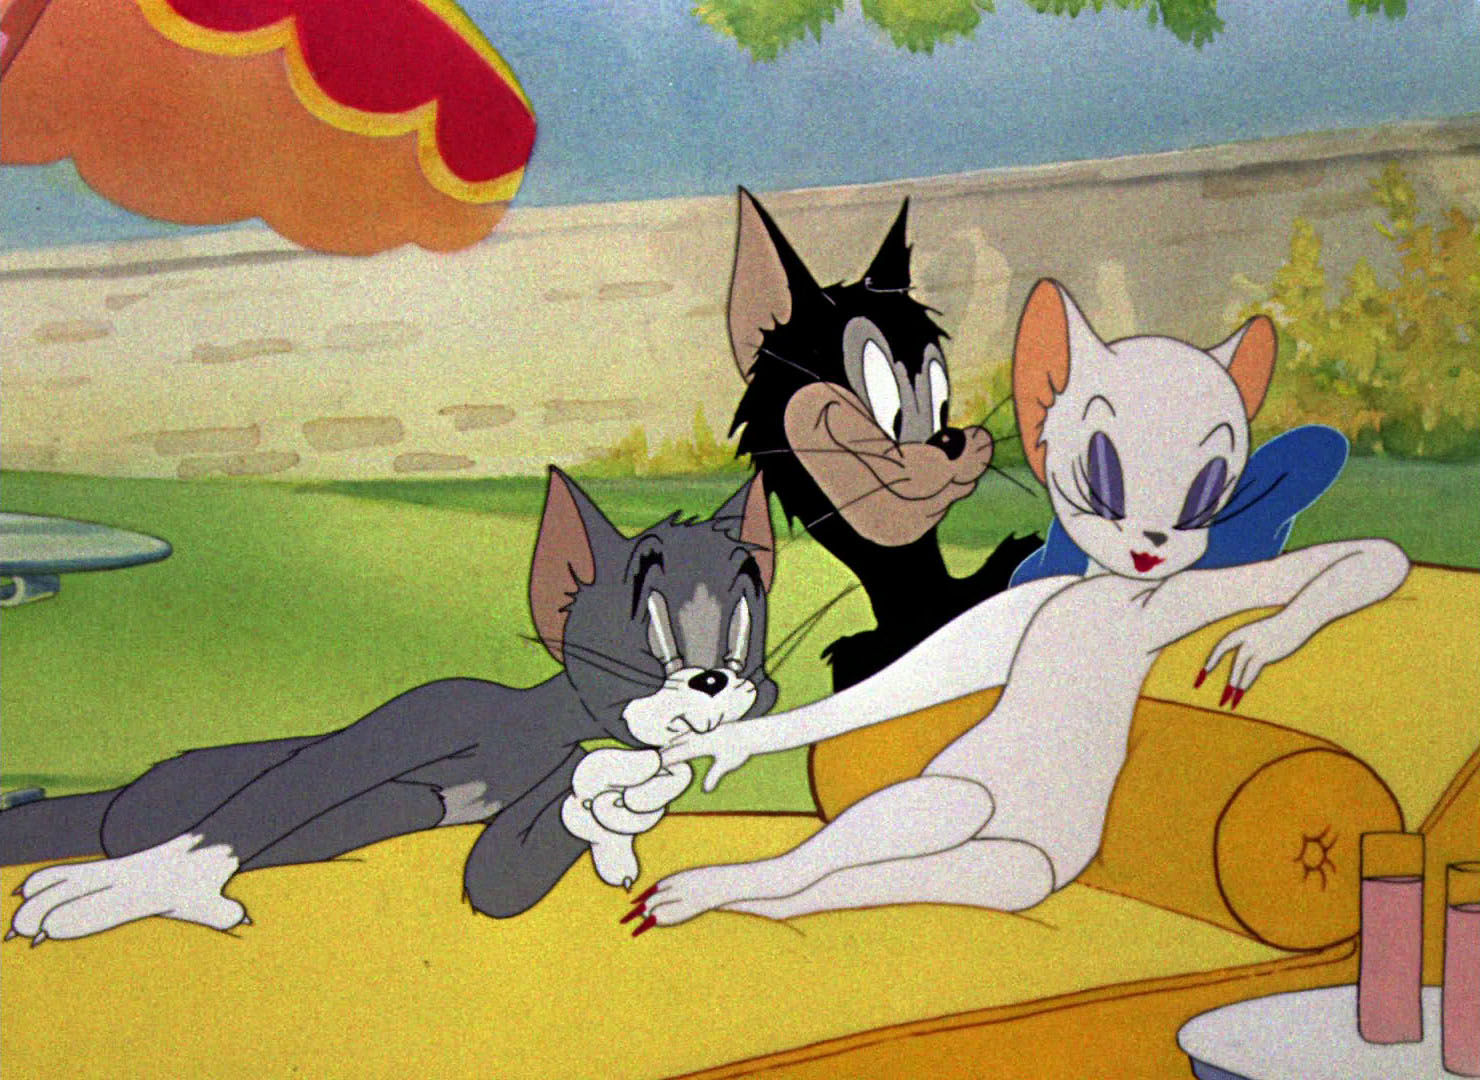 Tom & Jerry Pictures: "Springtime for Thomas" .